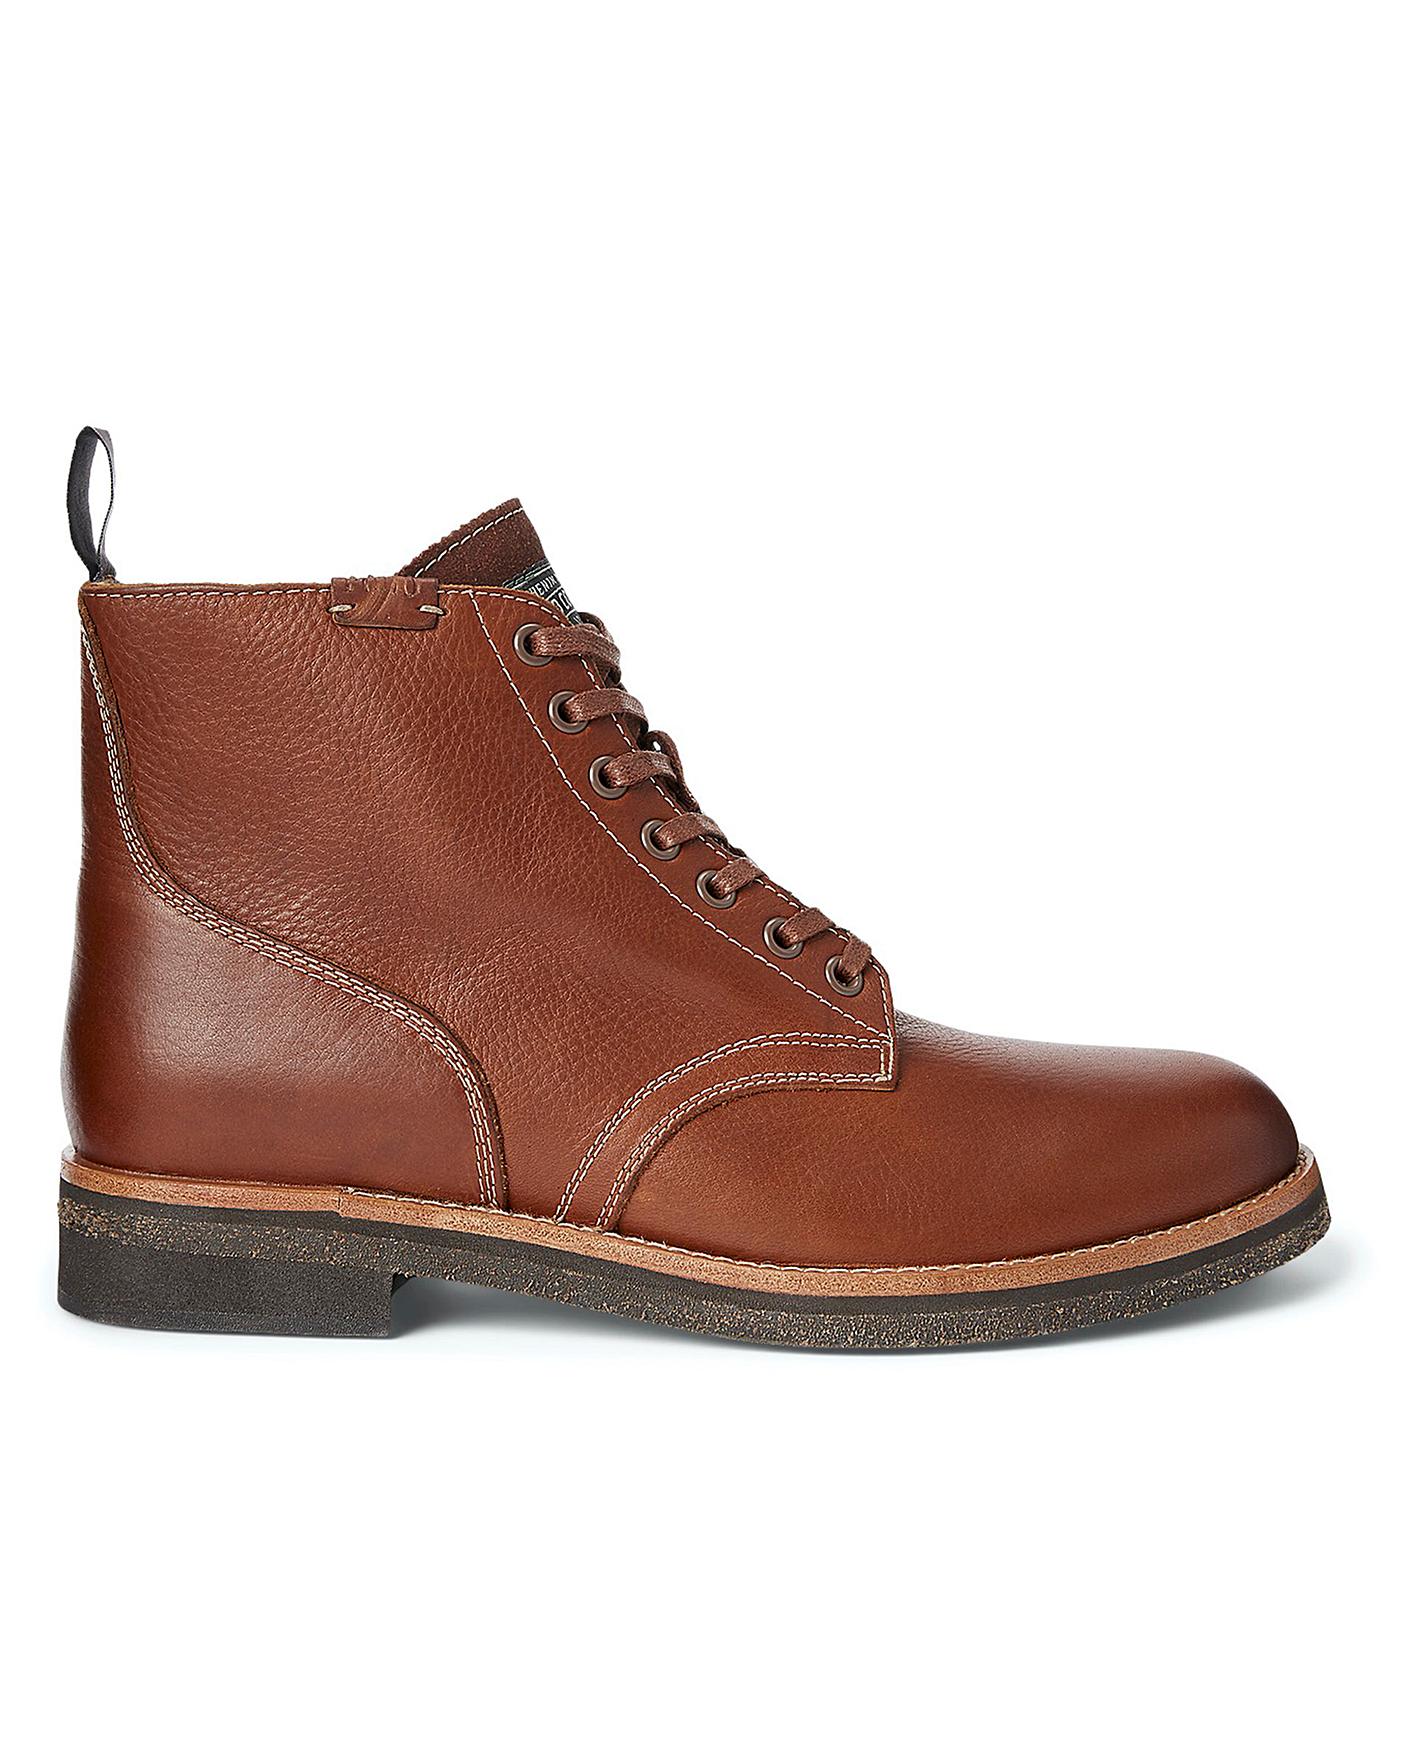 Ralph Lauren Leather Army Boot